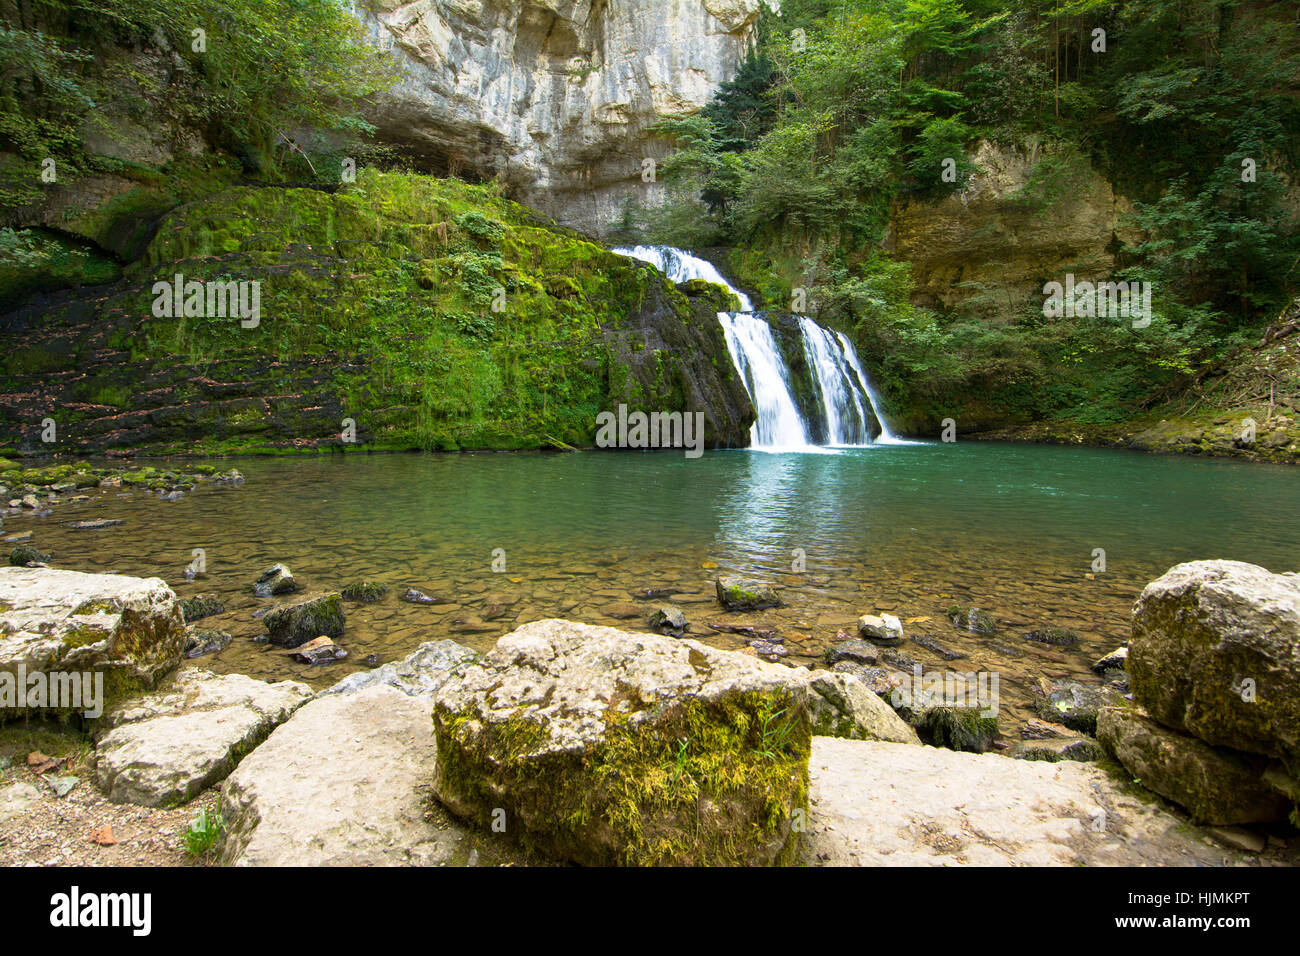 Spring of the river Lison in the Franche Comté area in France Stock Photo